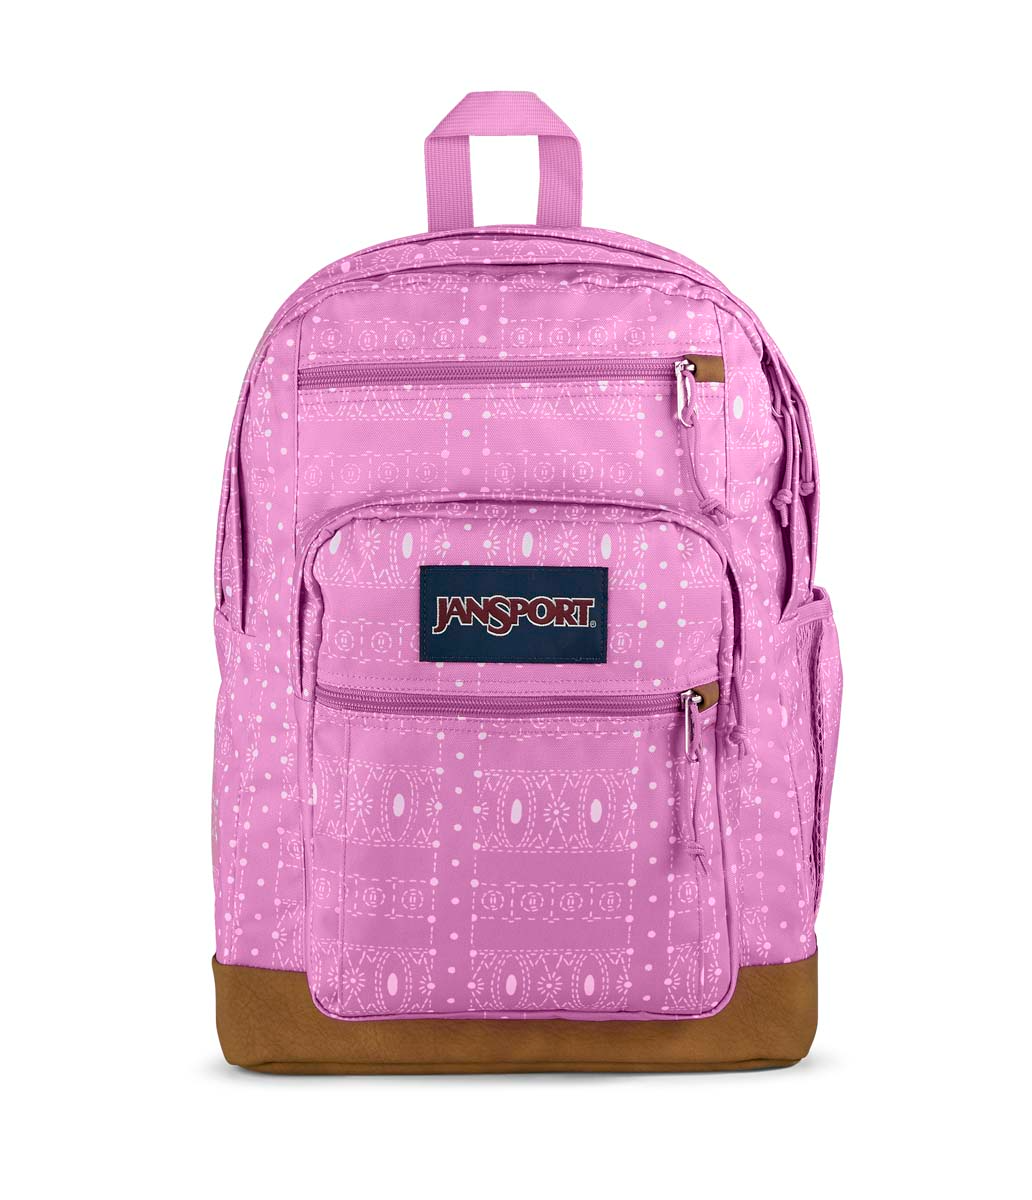 JANSPORT COOL STUDENT QUILTED CONCHO